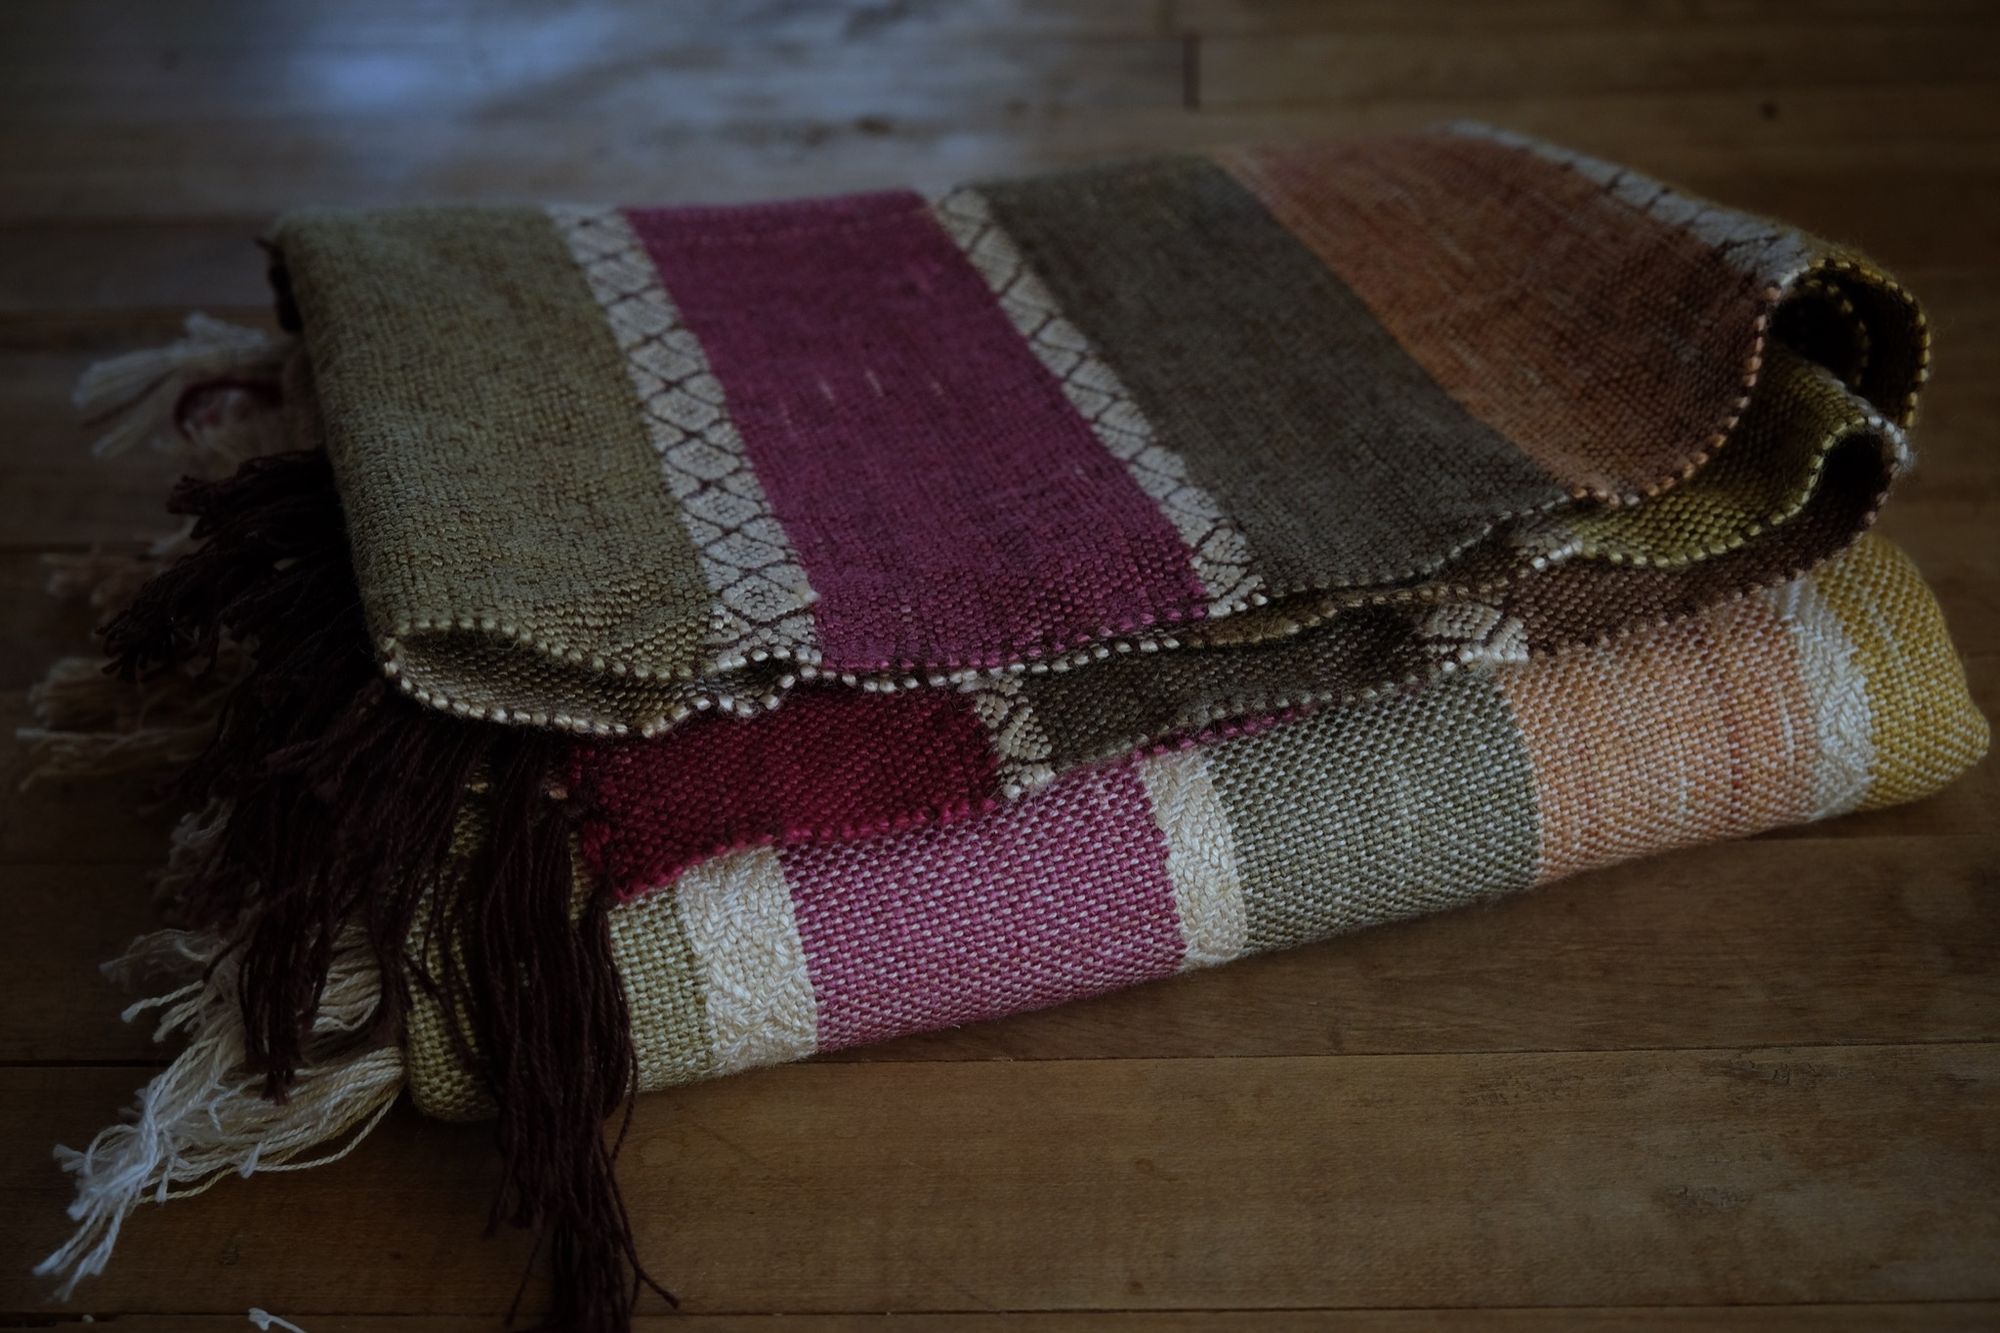 A detail of handwoven silk fabric in soft rainbow striped shades, naturally dyed, laying folded on the floor